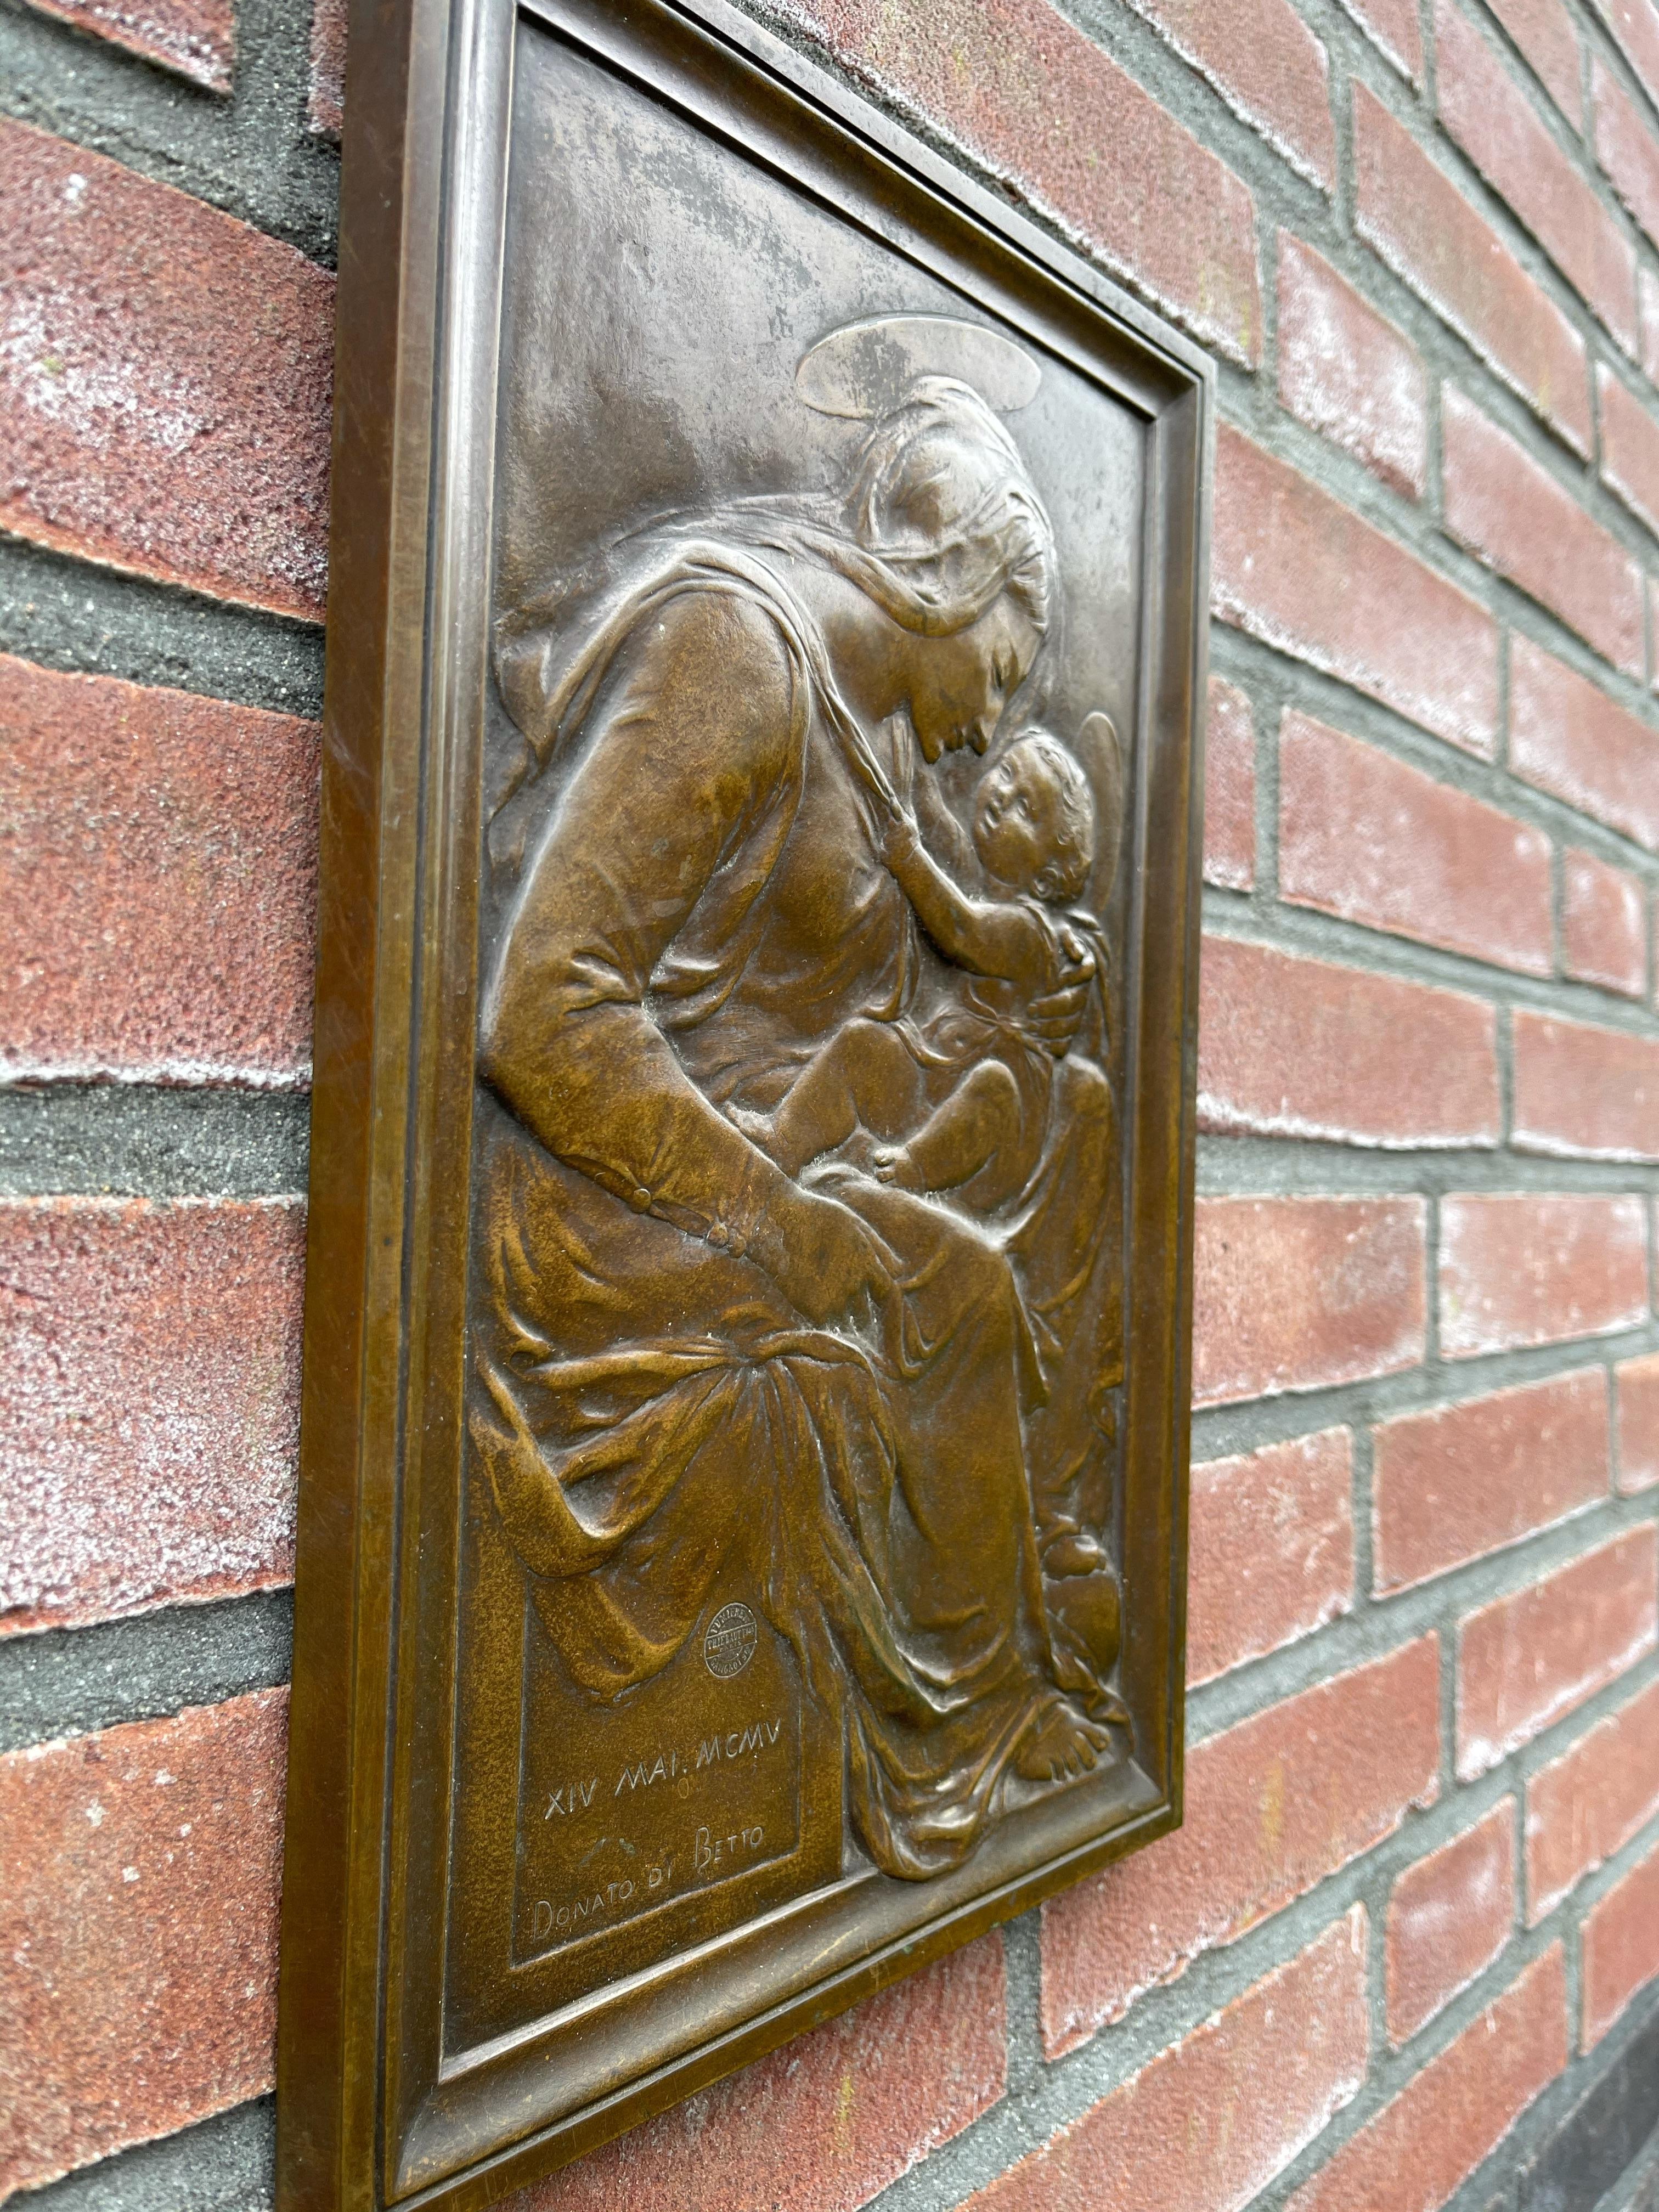 Symbolic and meaningful work of religious art.

Since the original by Donatello is in a museum somewhere, this beautiful bronze wall plaque 'after Donatello' is the best specimen you will be able to find anywhere. The original 'Mary and Child' by